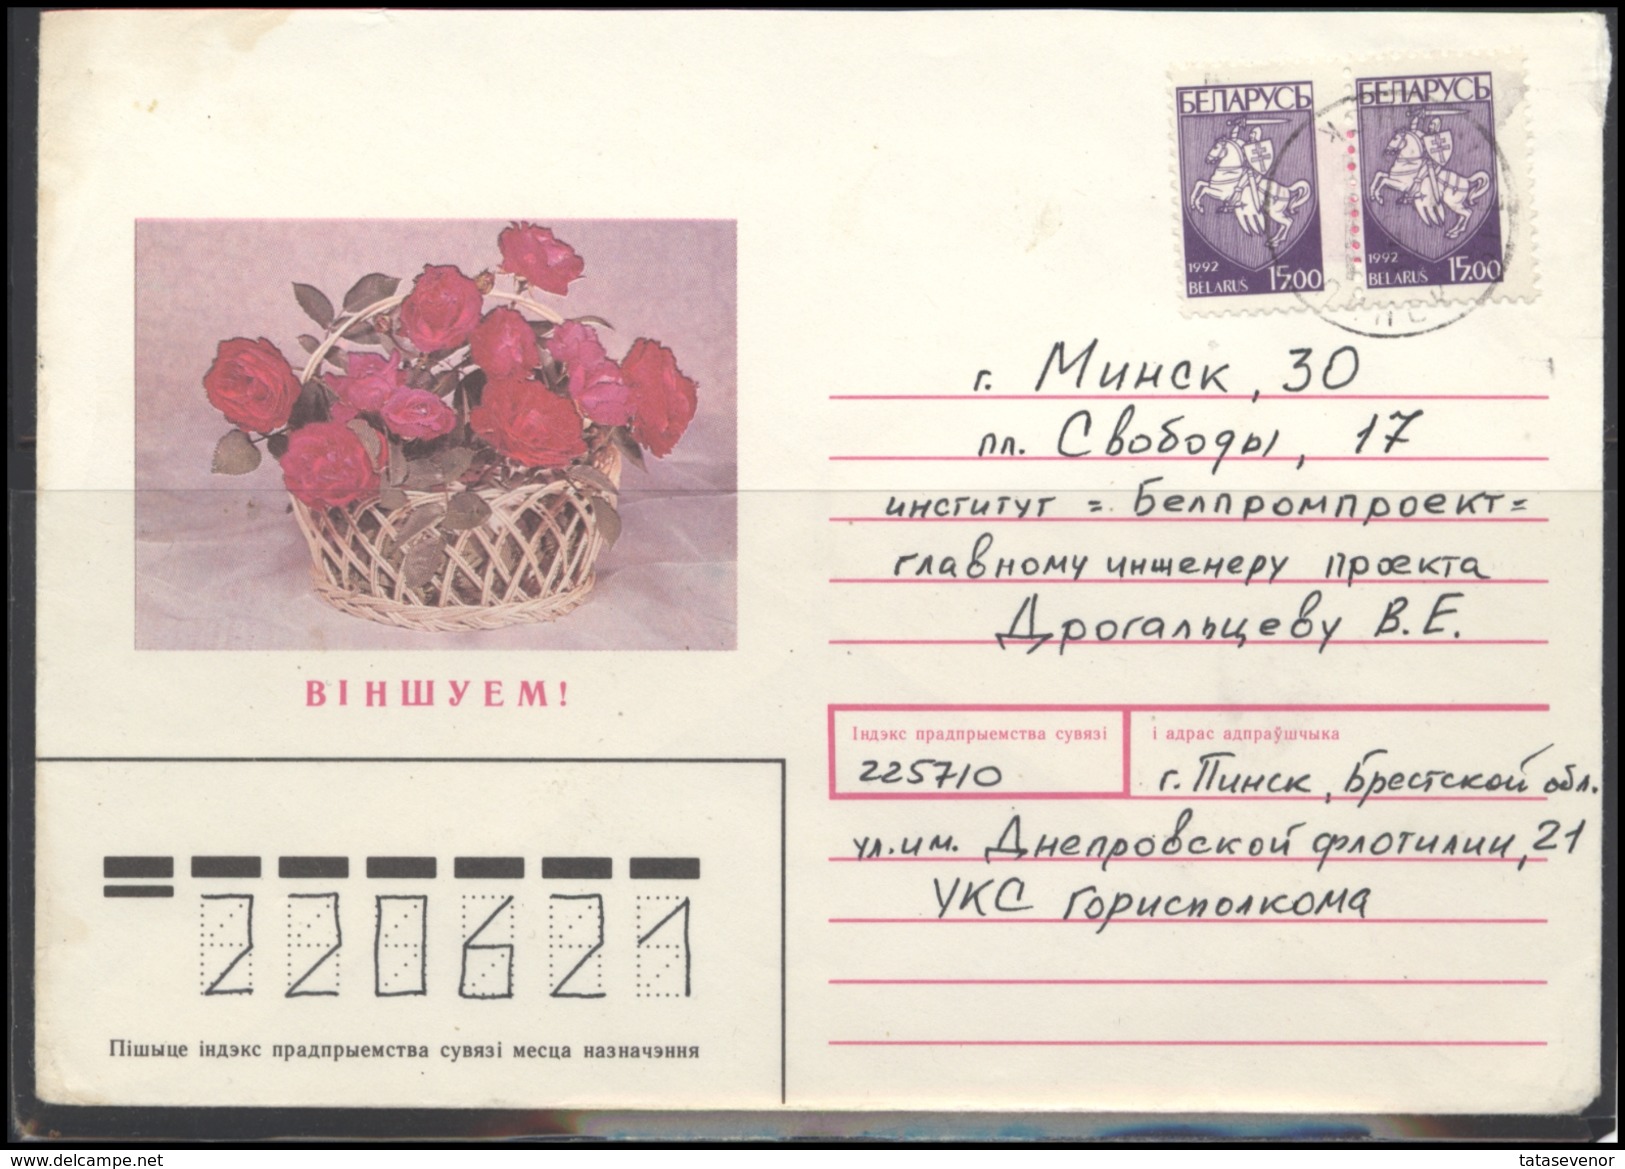 RUSSIA USSR starter lot of USED COVERS ROSES. No duplication.